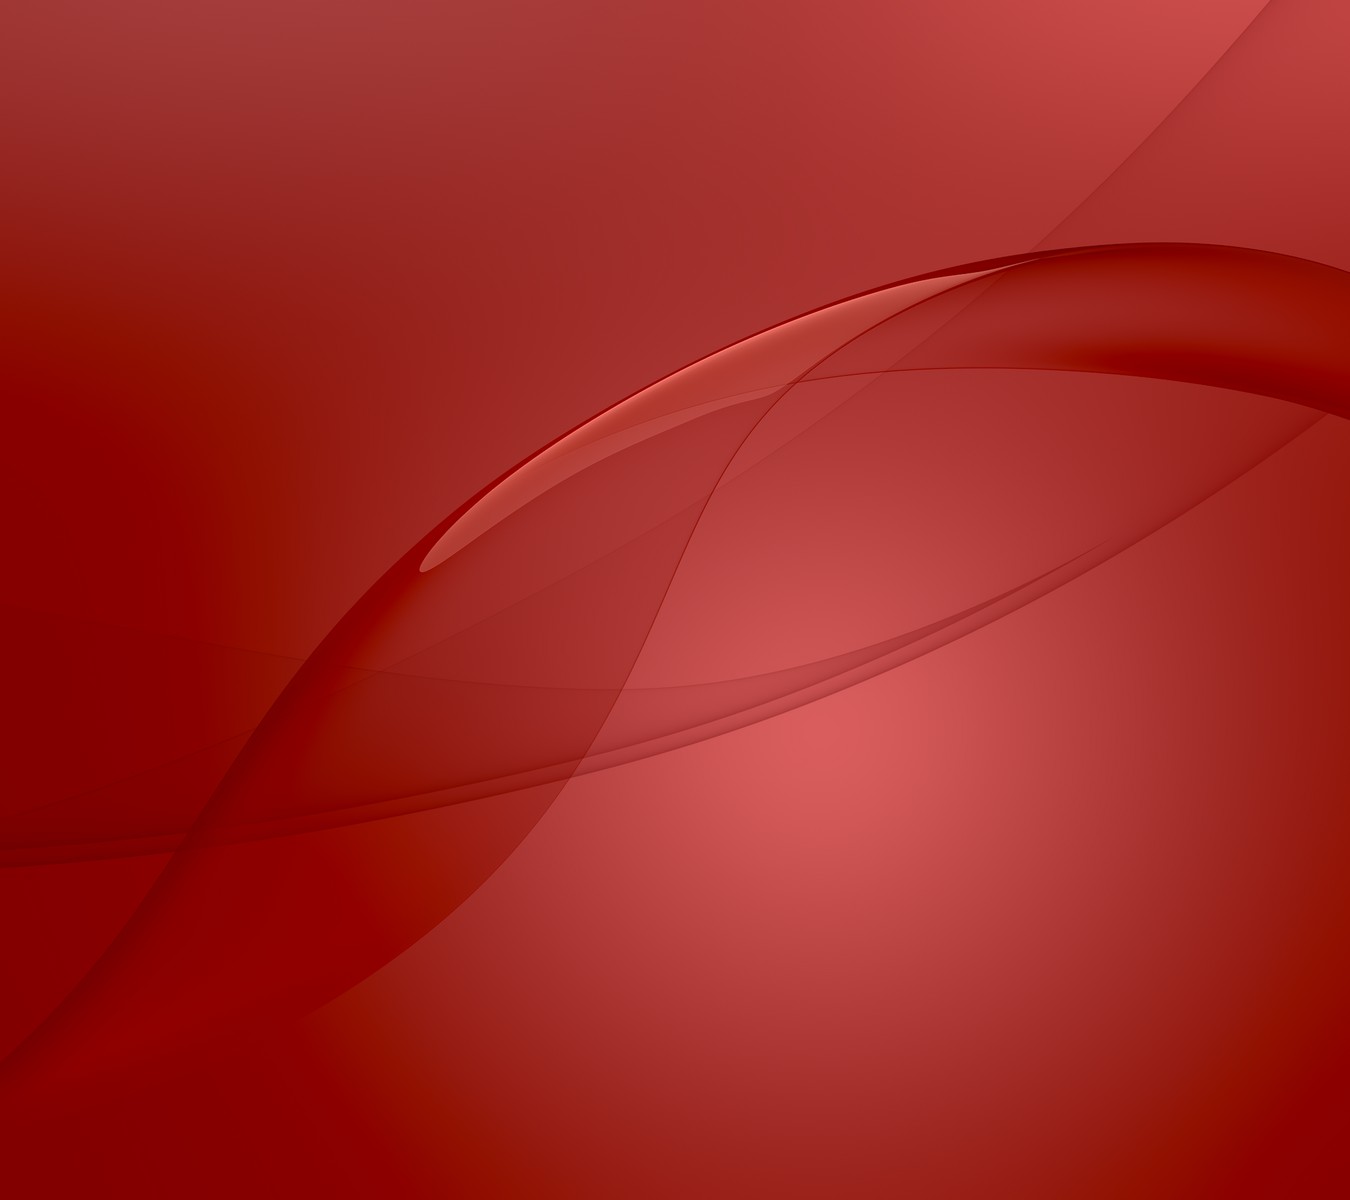 Download all official Sony Xperia Z3 wallpapers here